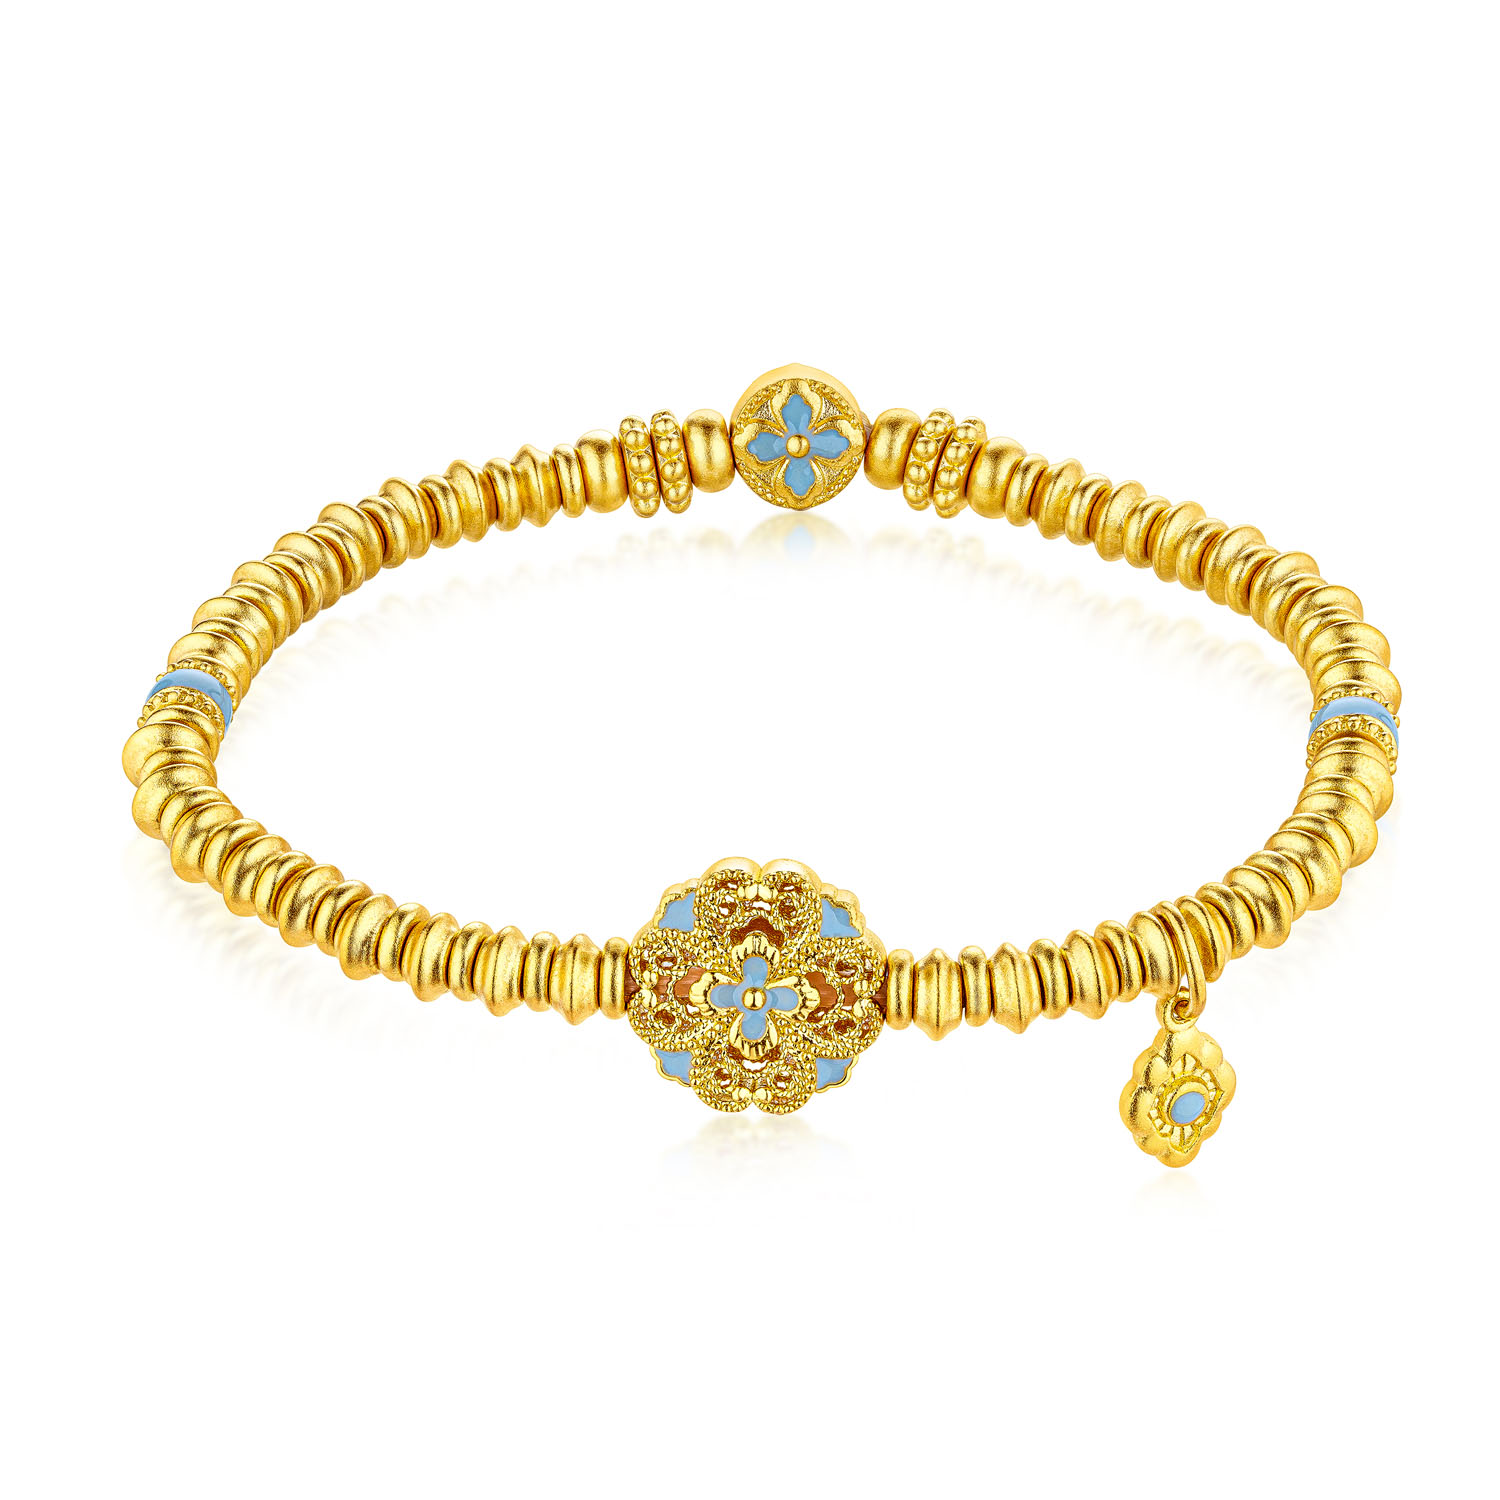 Heirloom Fortune - Charm of Song Dynasty Collection "Blue Floral Rhythm" Gold Bracelet